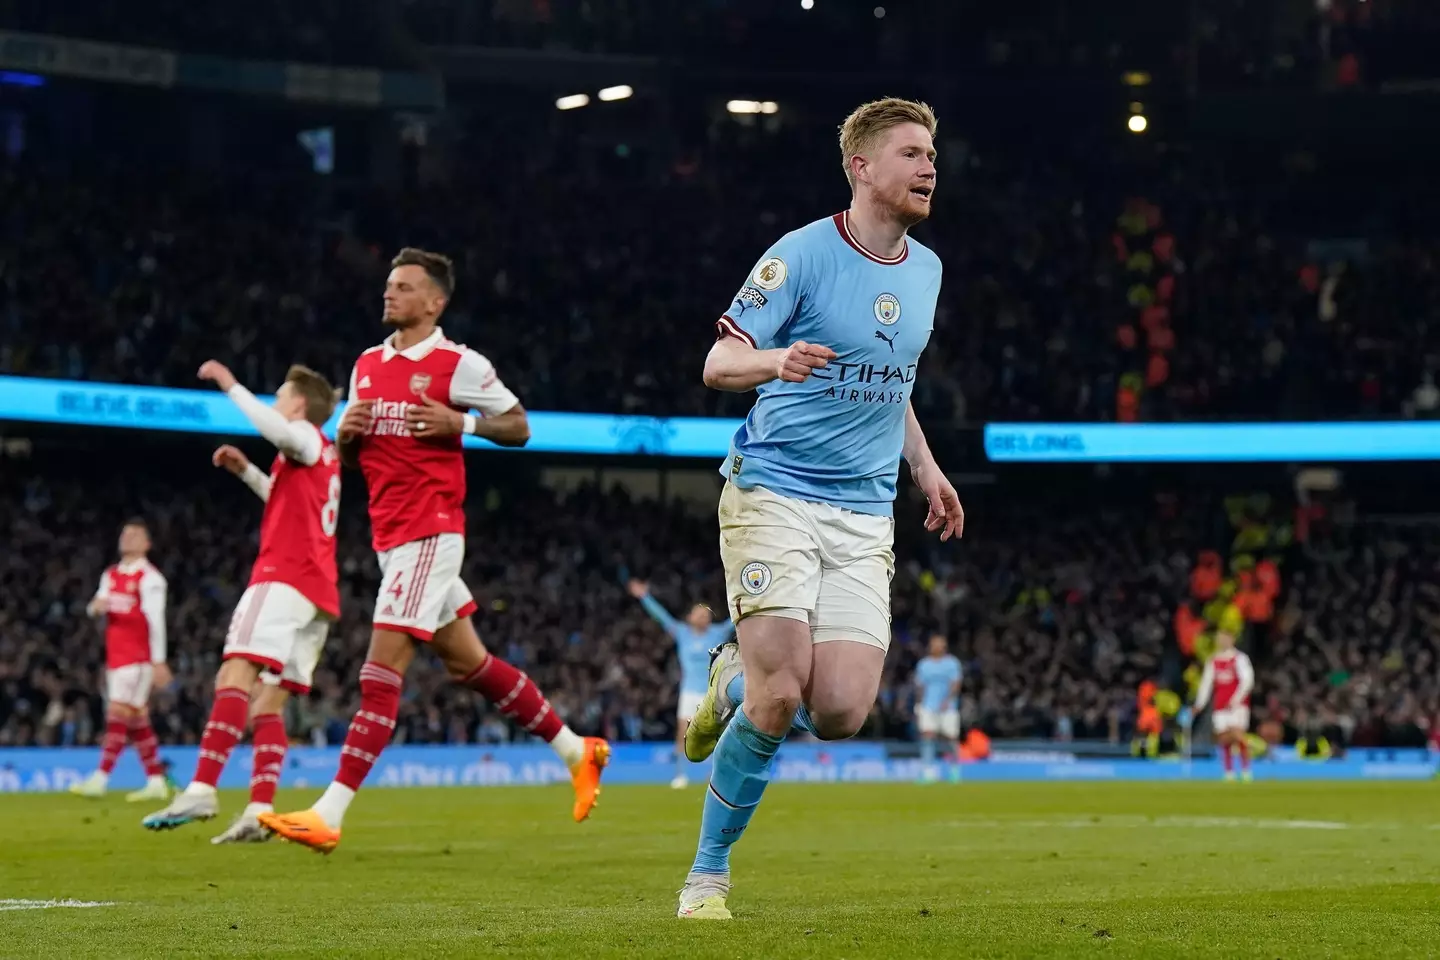 De Bruyne was in such good form on Wednesday. Image: Alamy